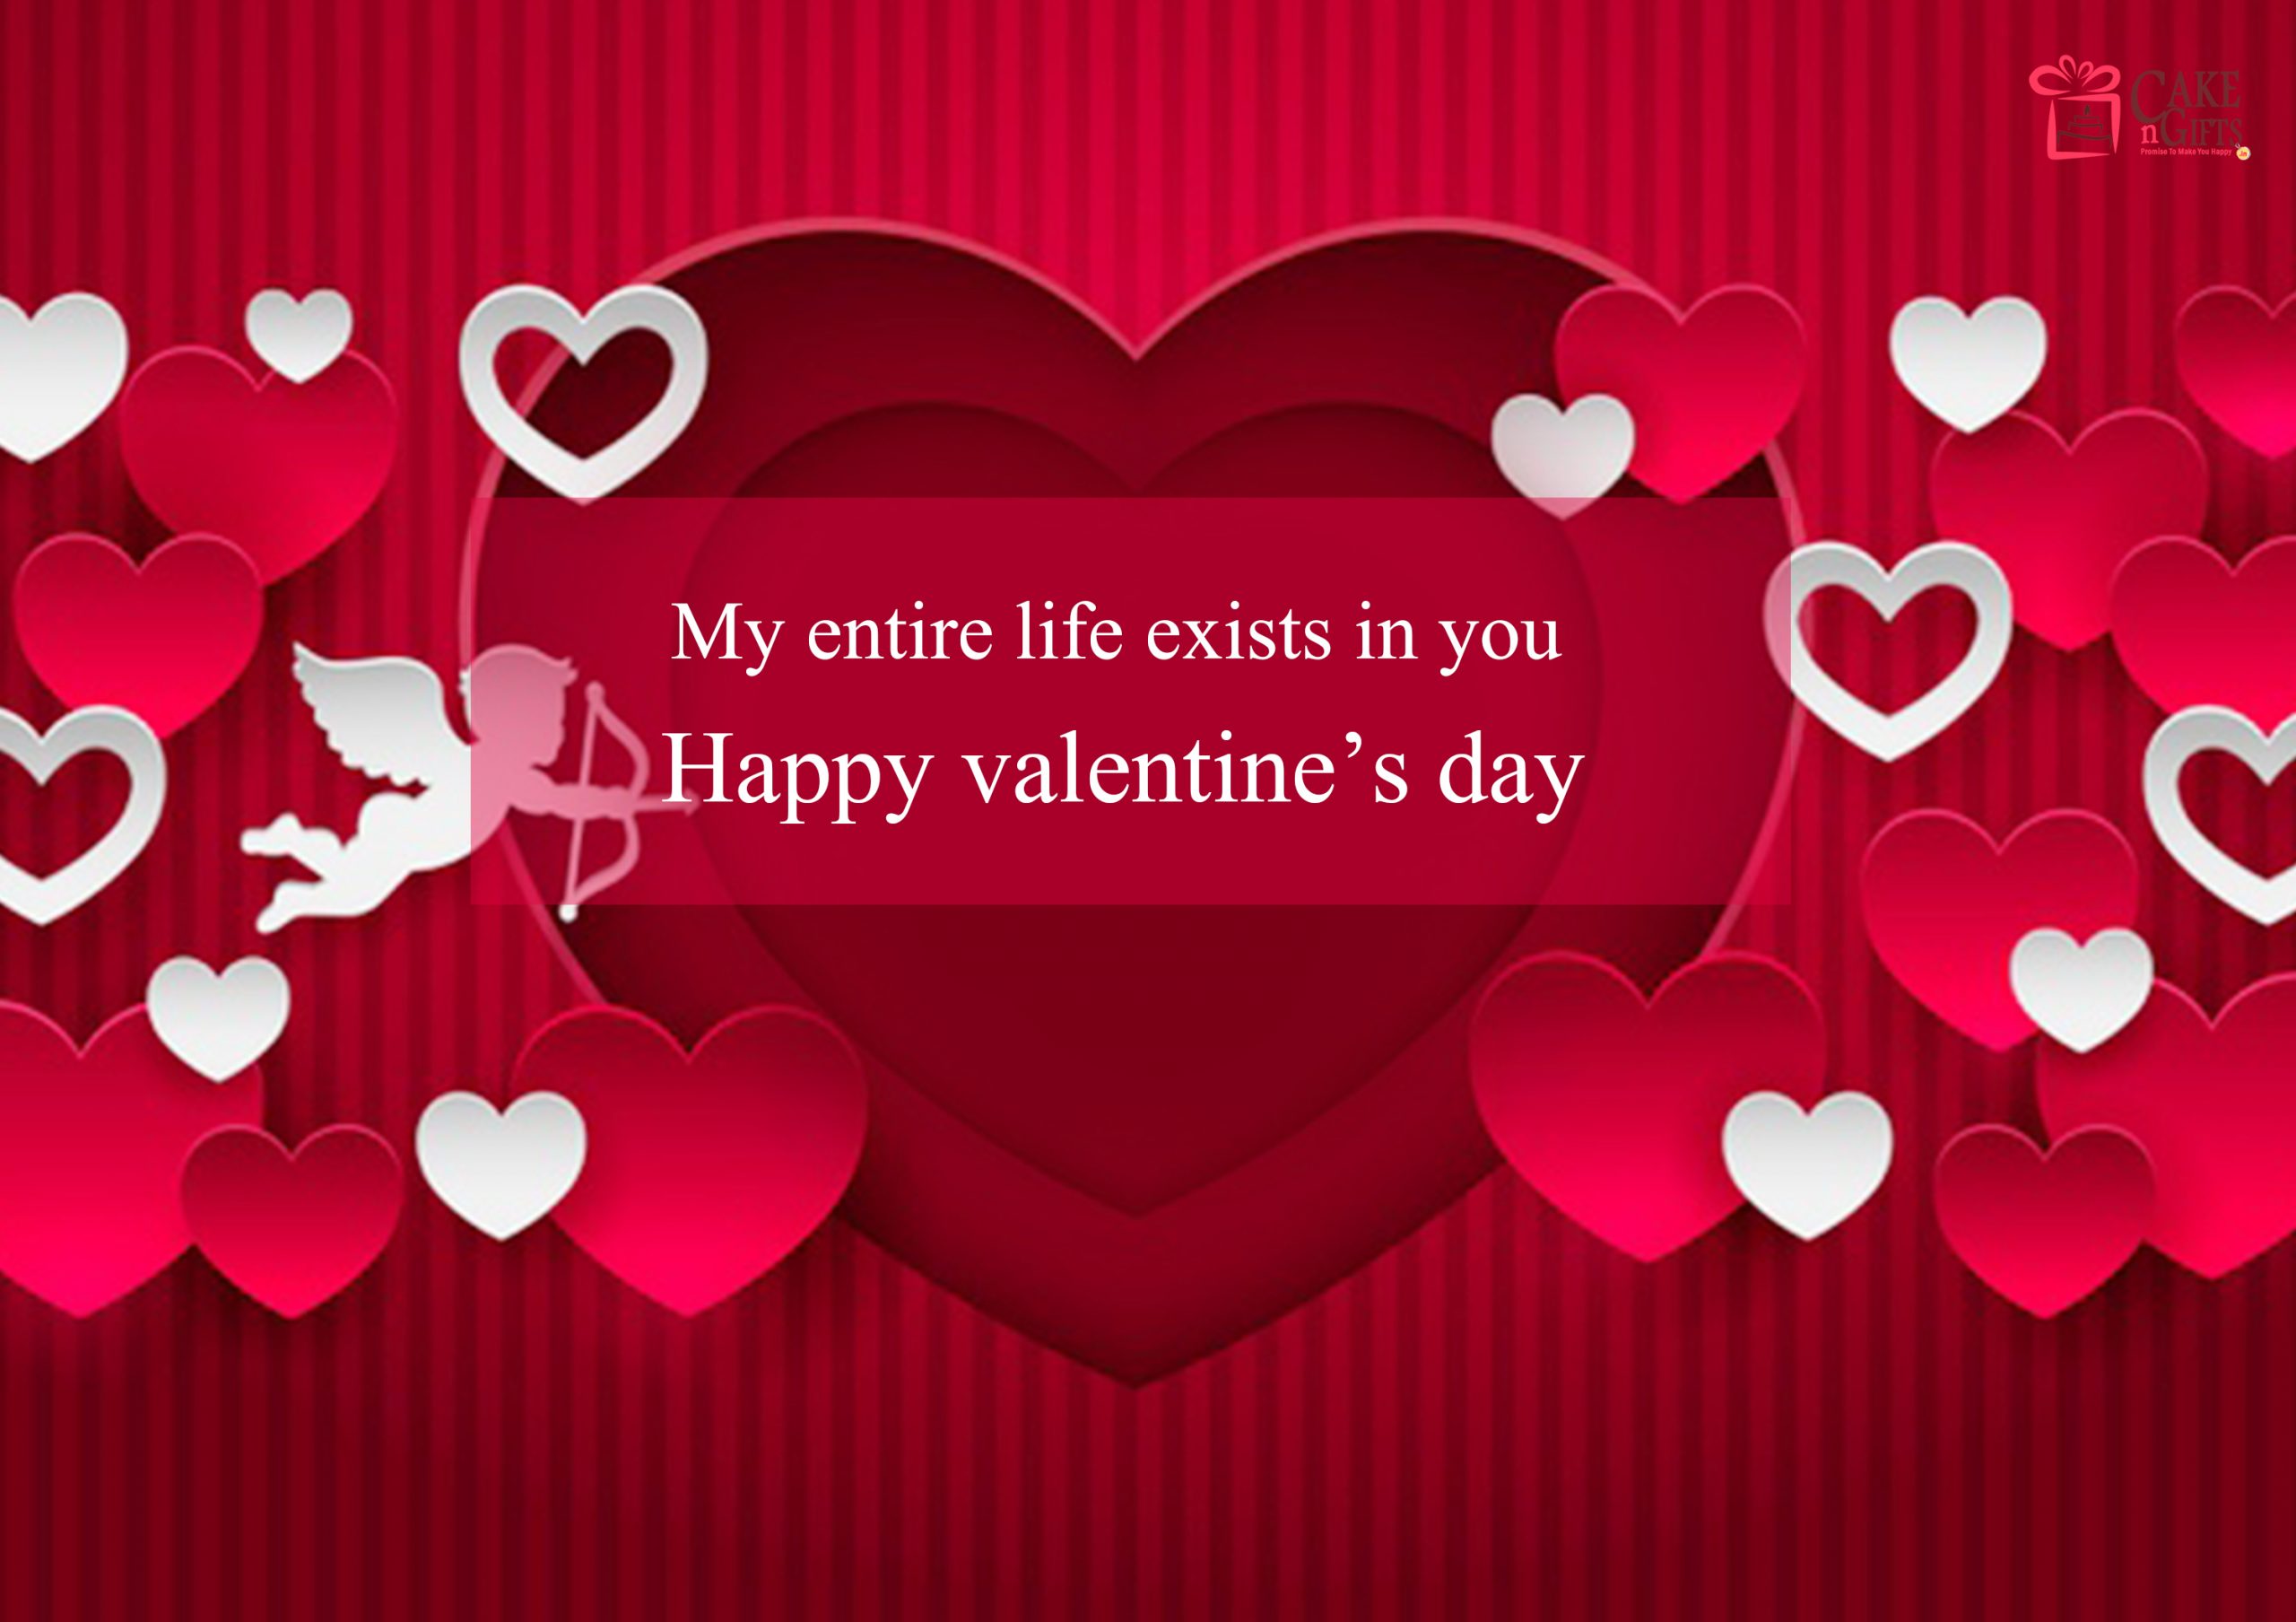 My Entire Life Exists in You - Happy Valentine's Day